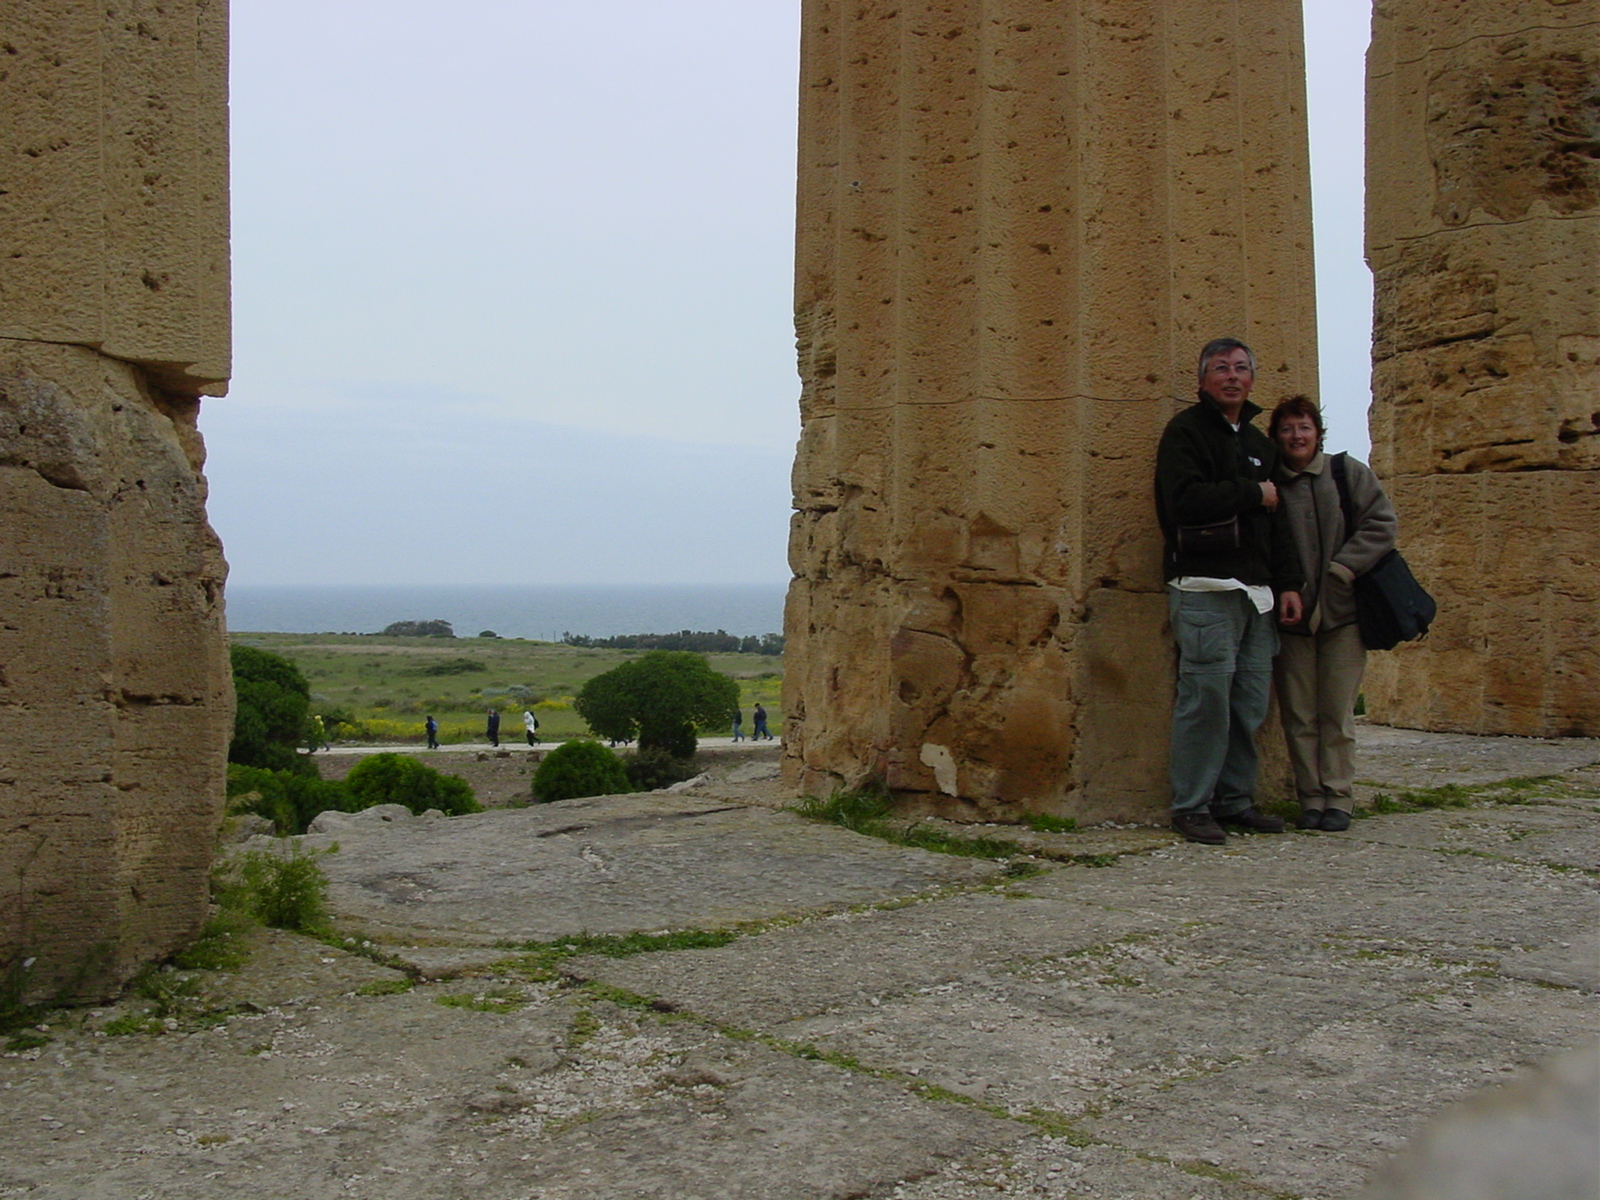 two people standing next to each other near many pillared structures